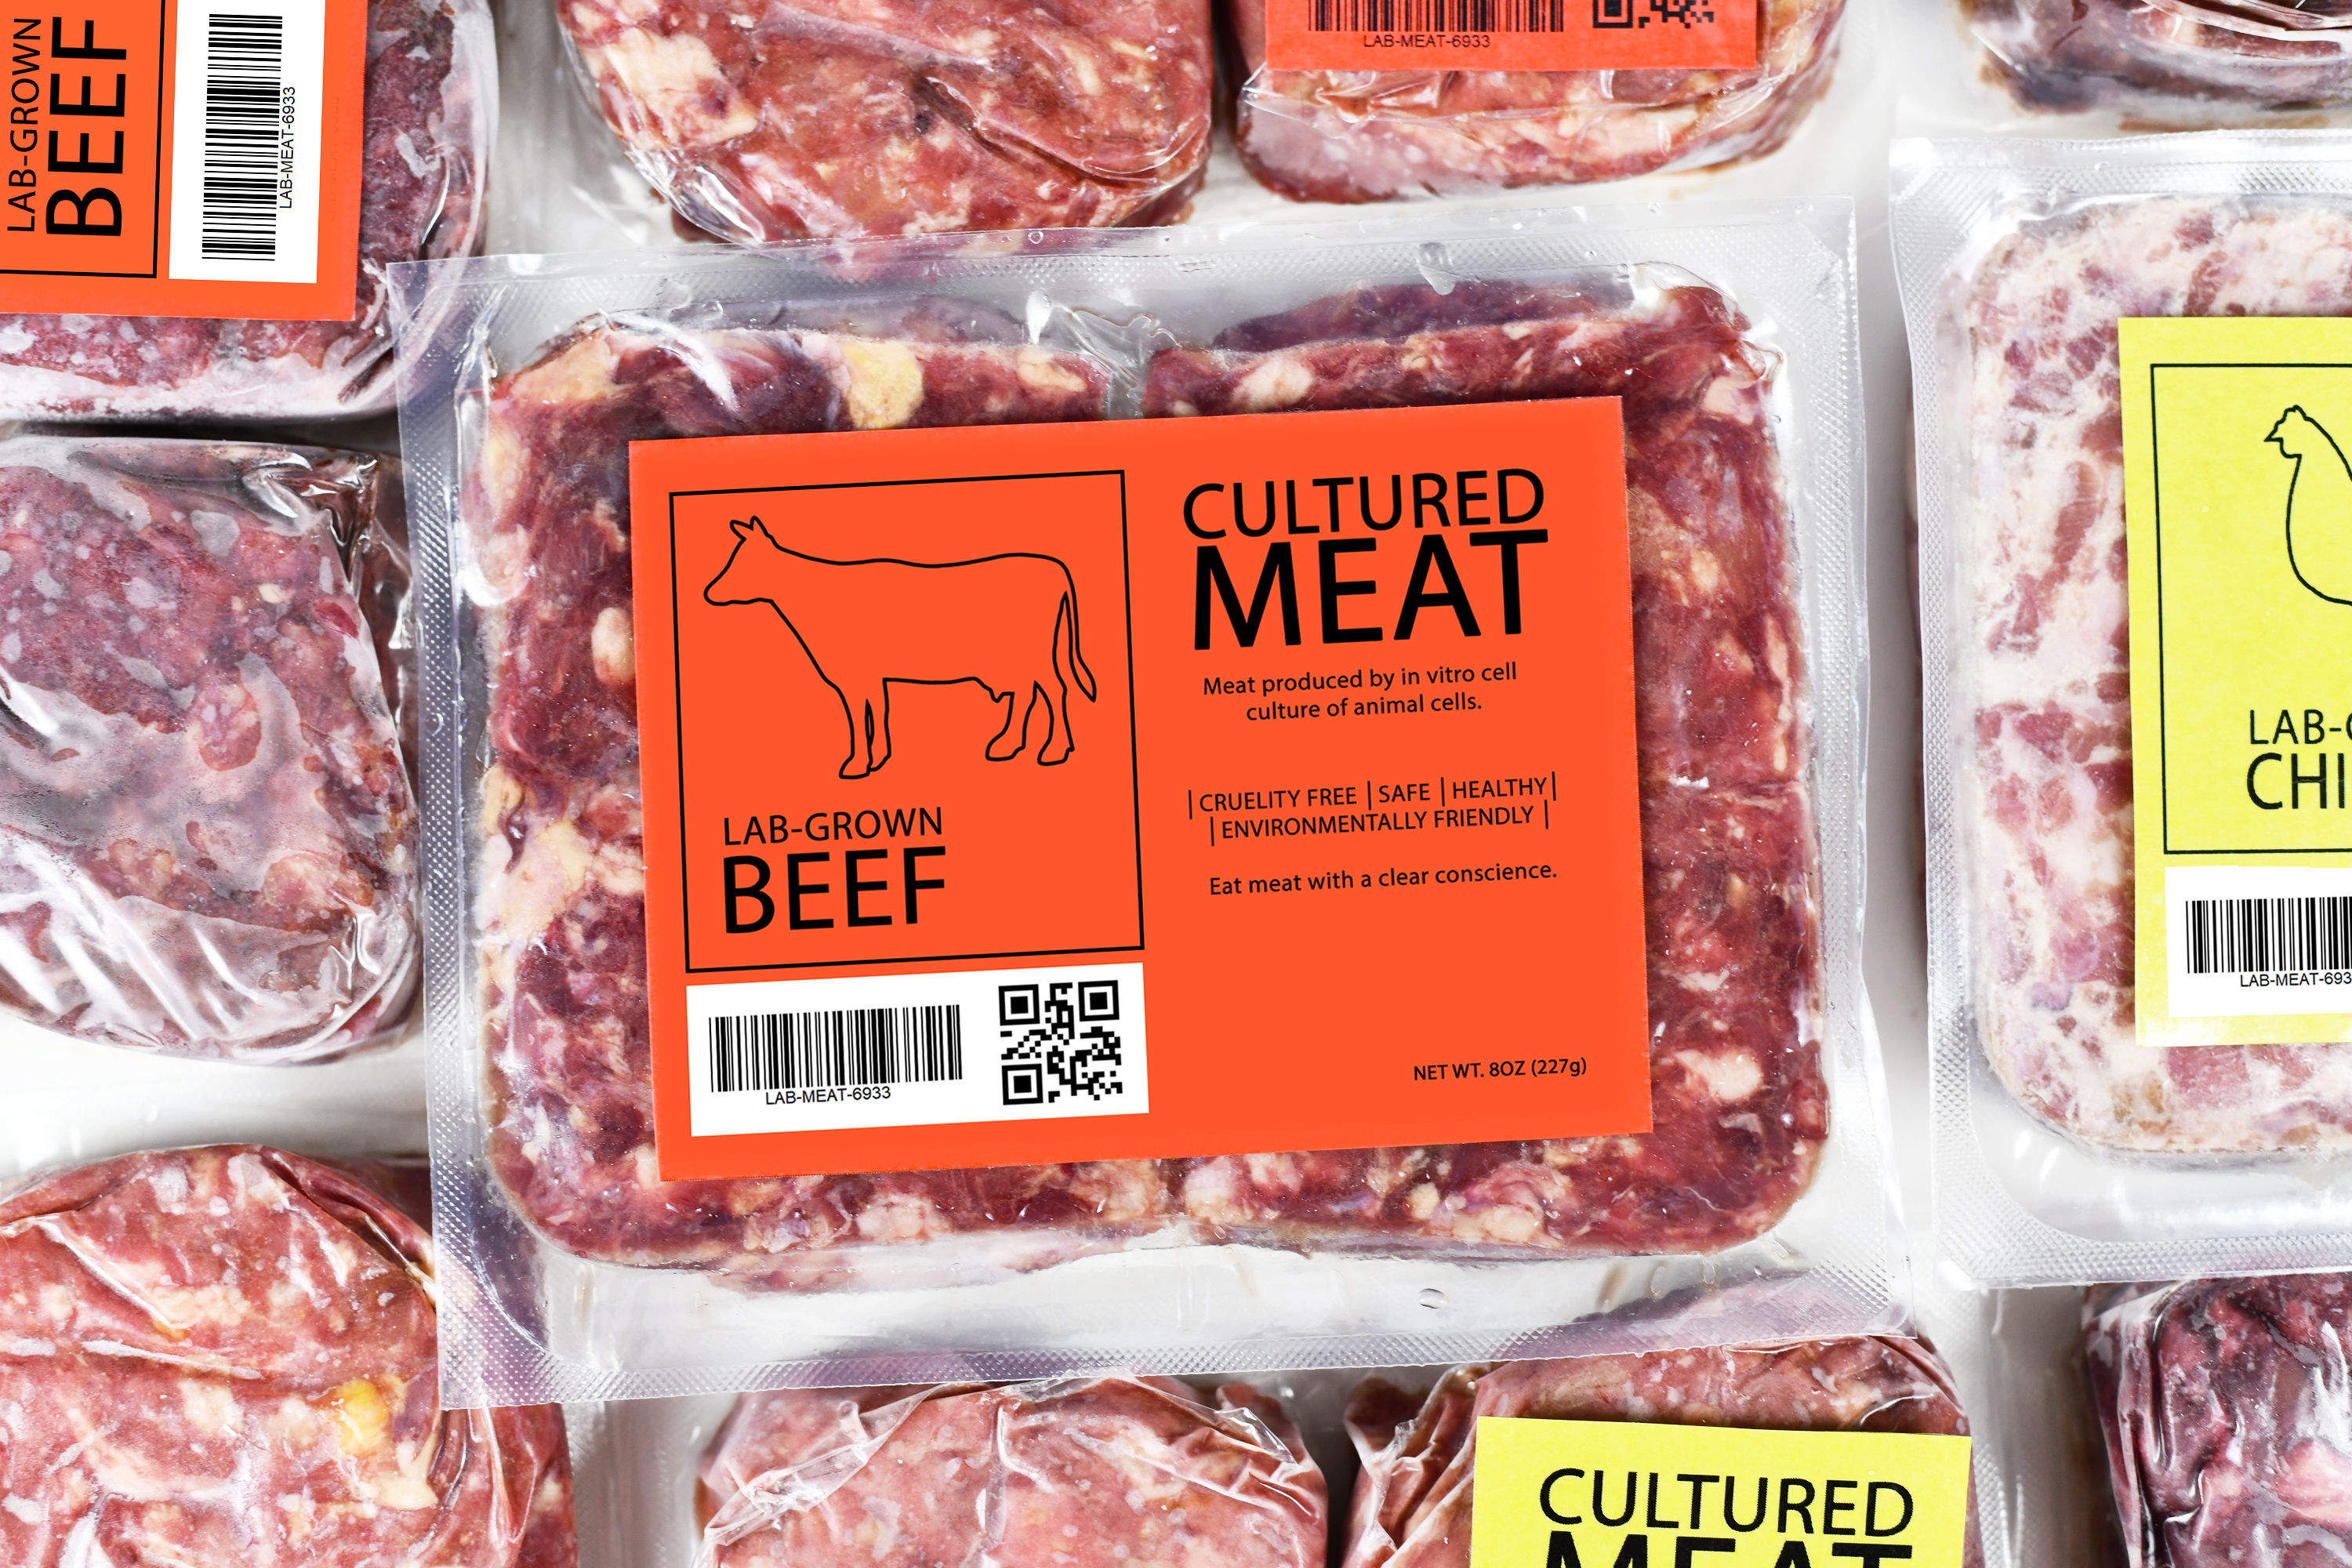 Image of packages beef, packaging reads 'Cultured Meat: meat produced by in vitro cell culture of animal cells. Cruelty free, safe, healthy, environmentally friendly. Lab-grown beef. Eat meat with a clear conscience.'